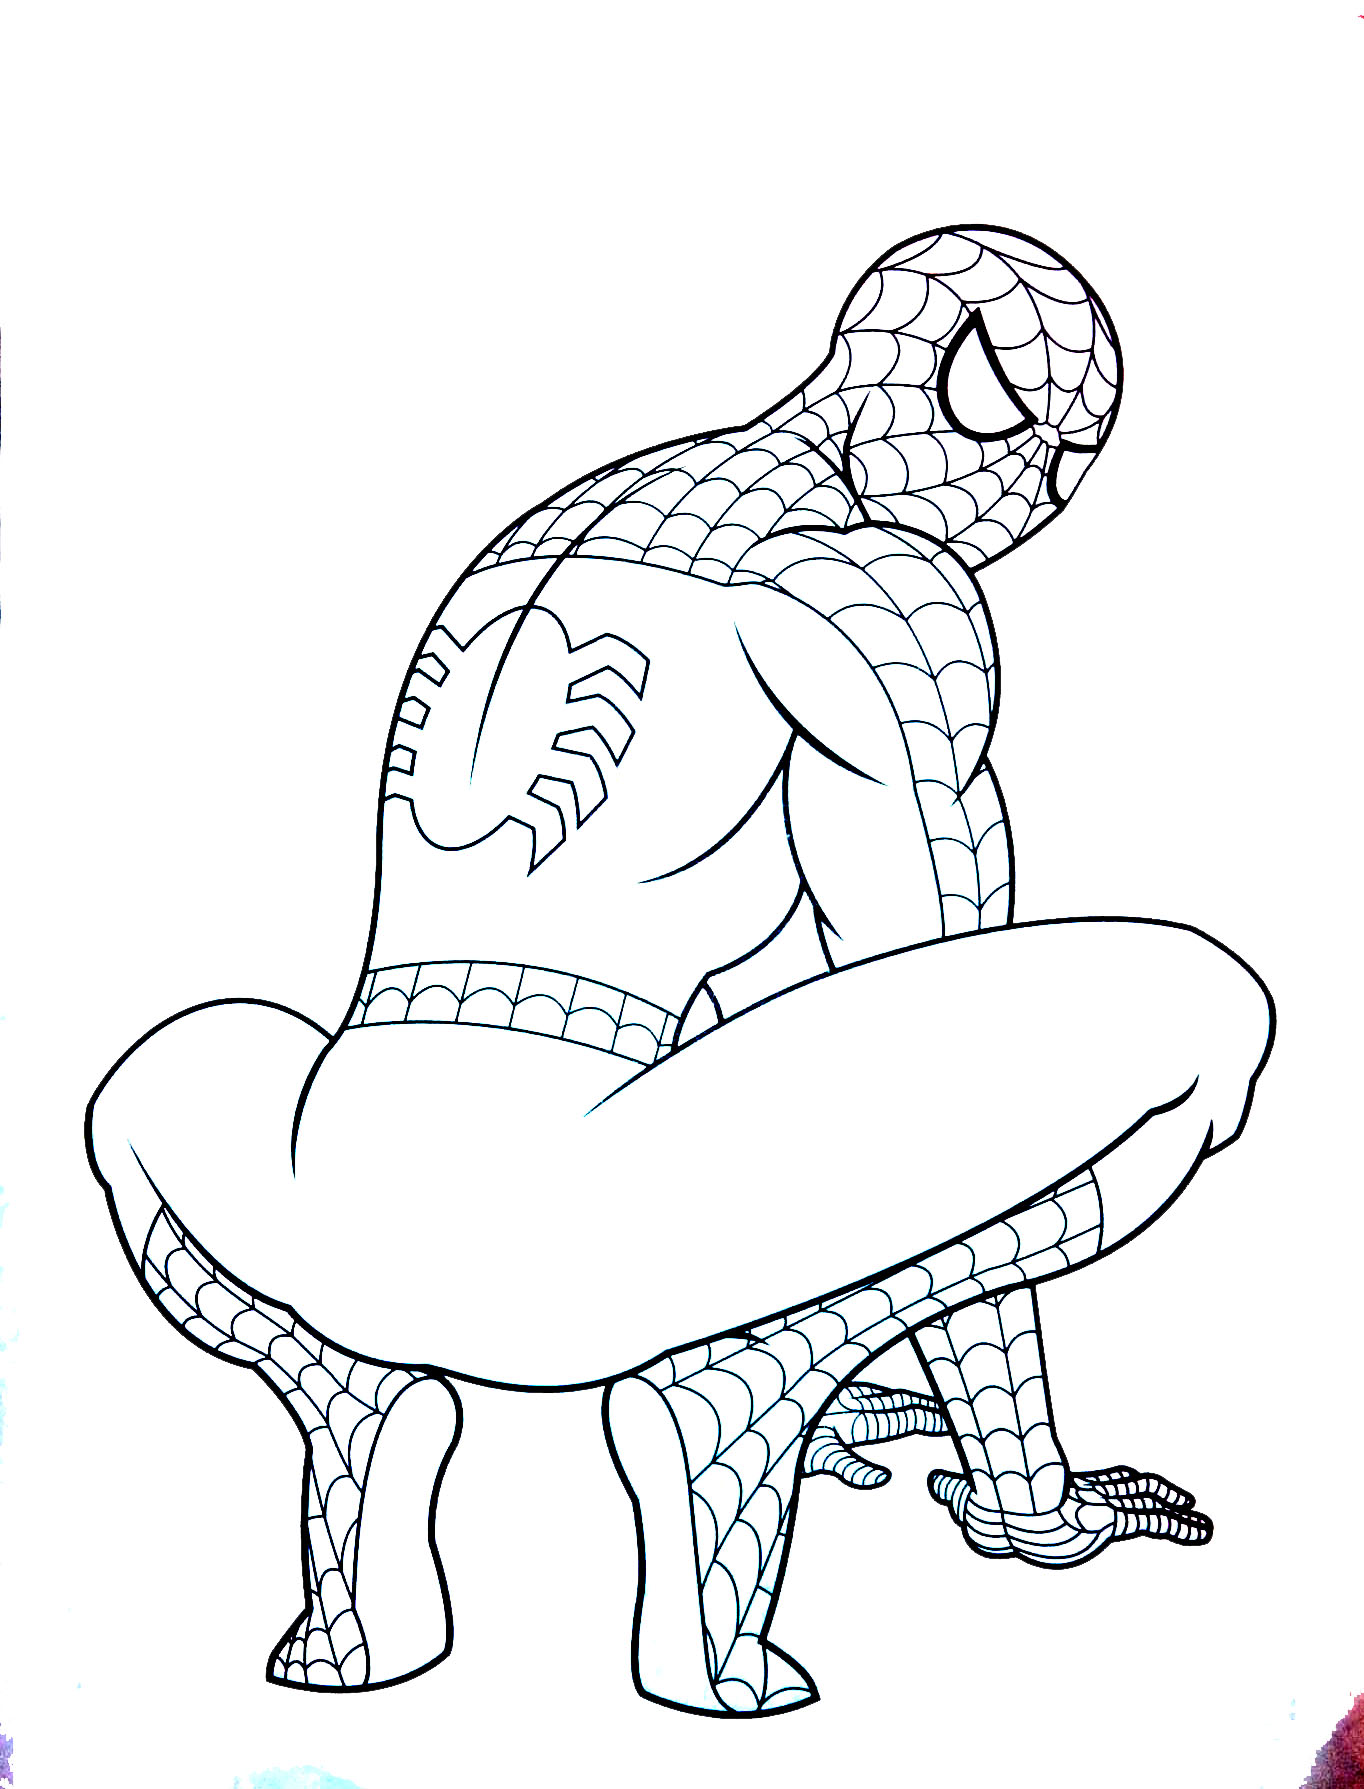 Spiderman image to color, easy for kids